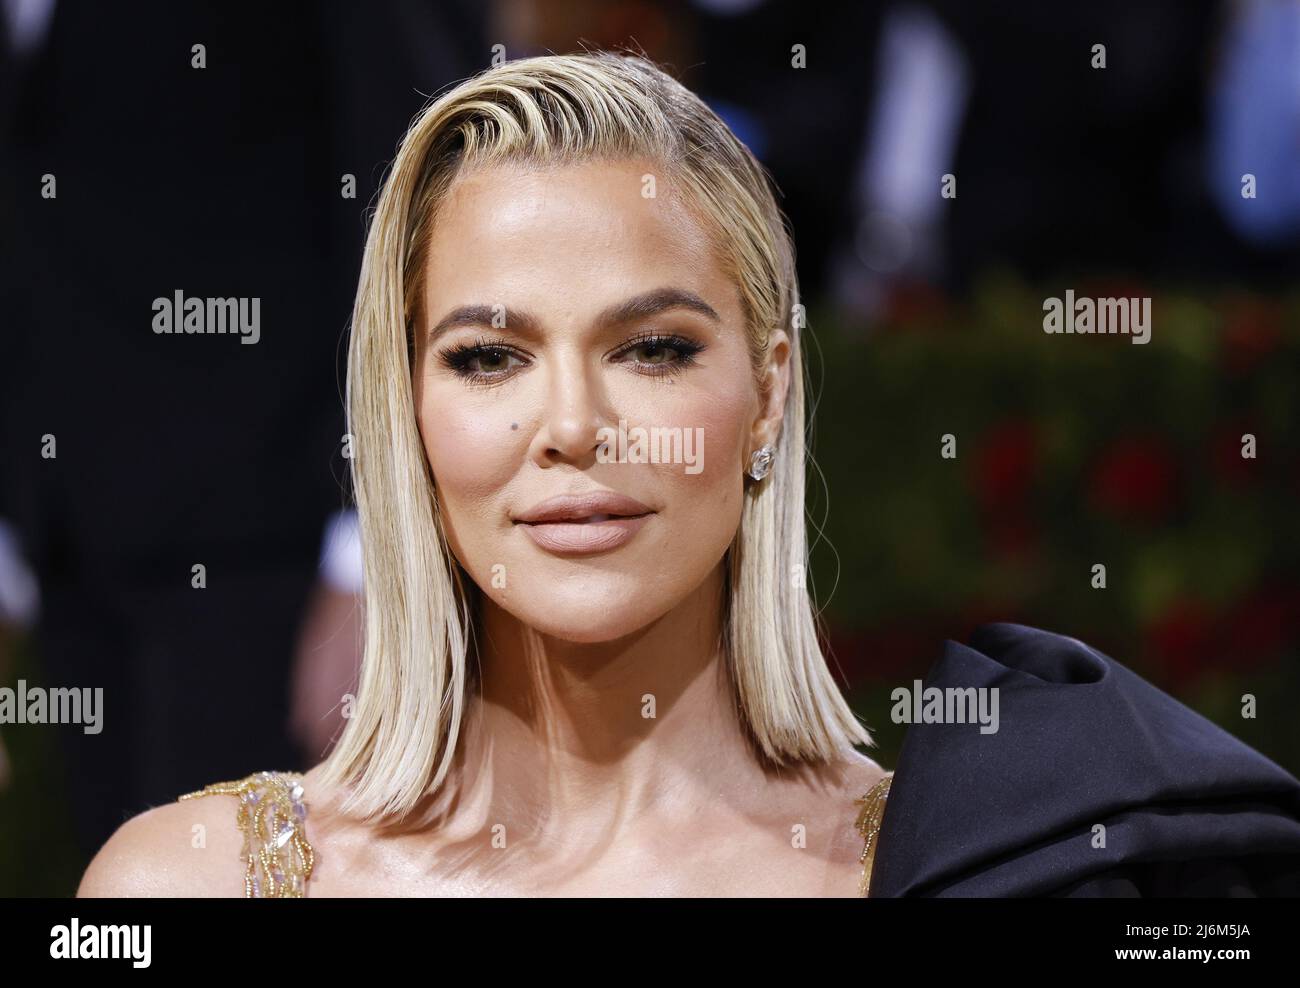 Khloe Kardashian arrives on the red carpet for The Met Gala at The Metropolitan Museum of Art celebrating the Costume Institute opening of 'In America: An Anthology of Fashion' in New York City on Monday, May 2, 2022.       Photo by John Angelillo/UPI Stock Photo